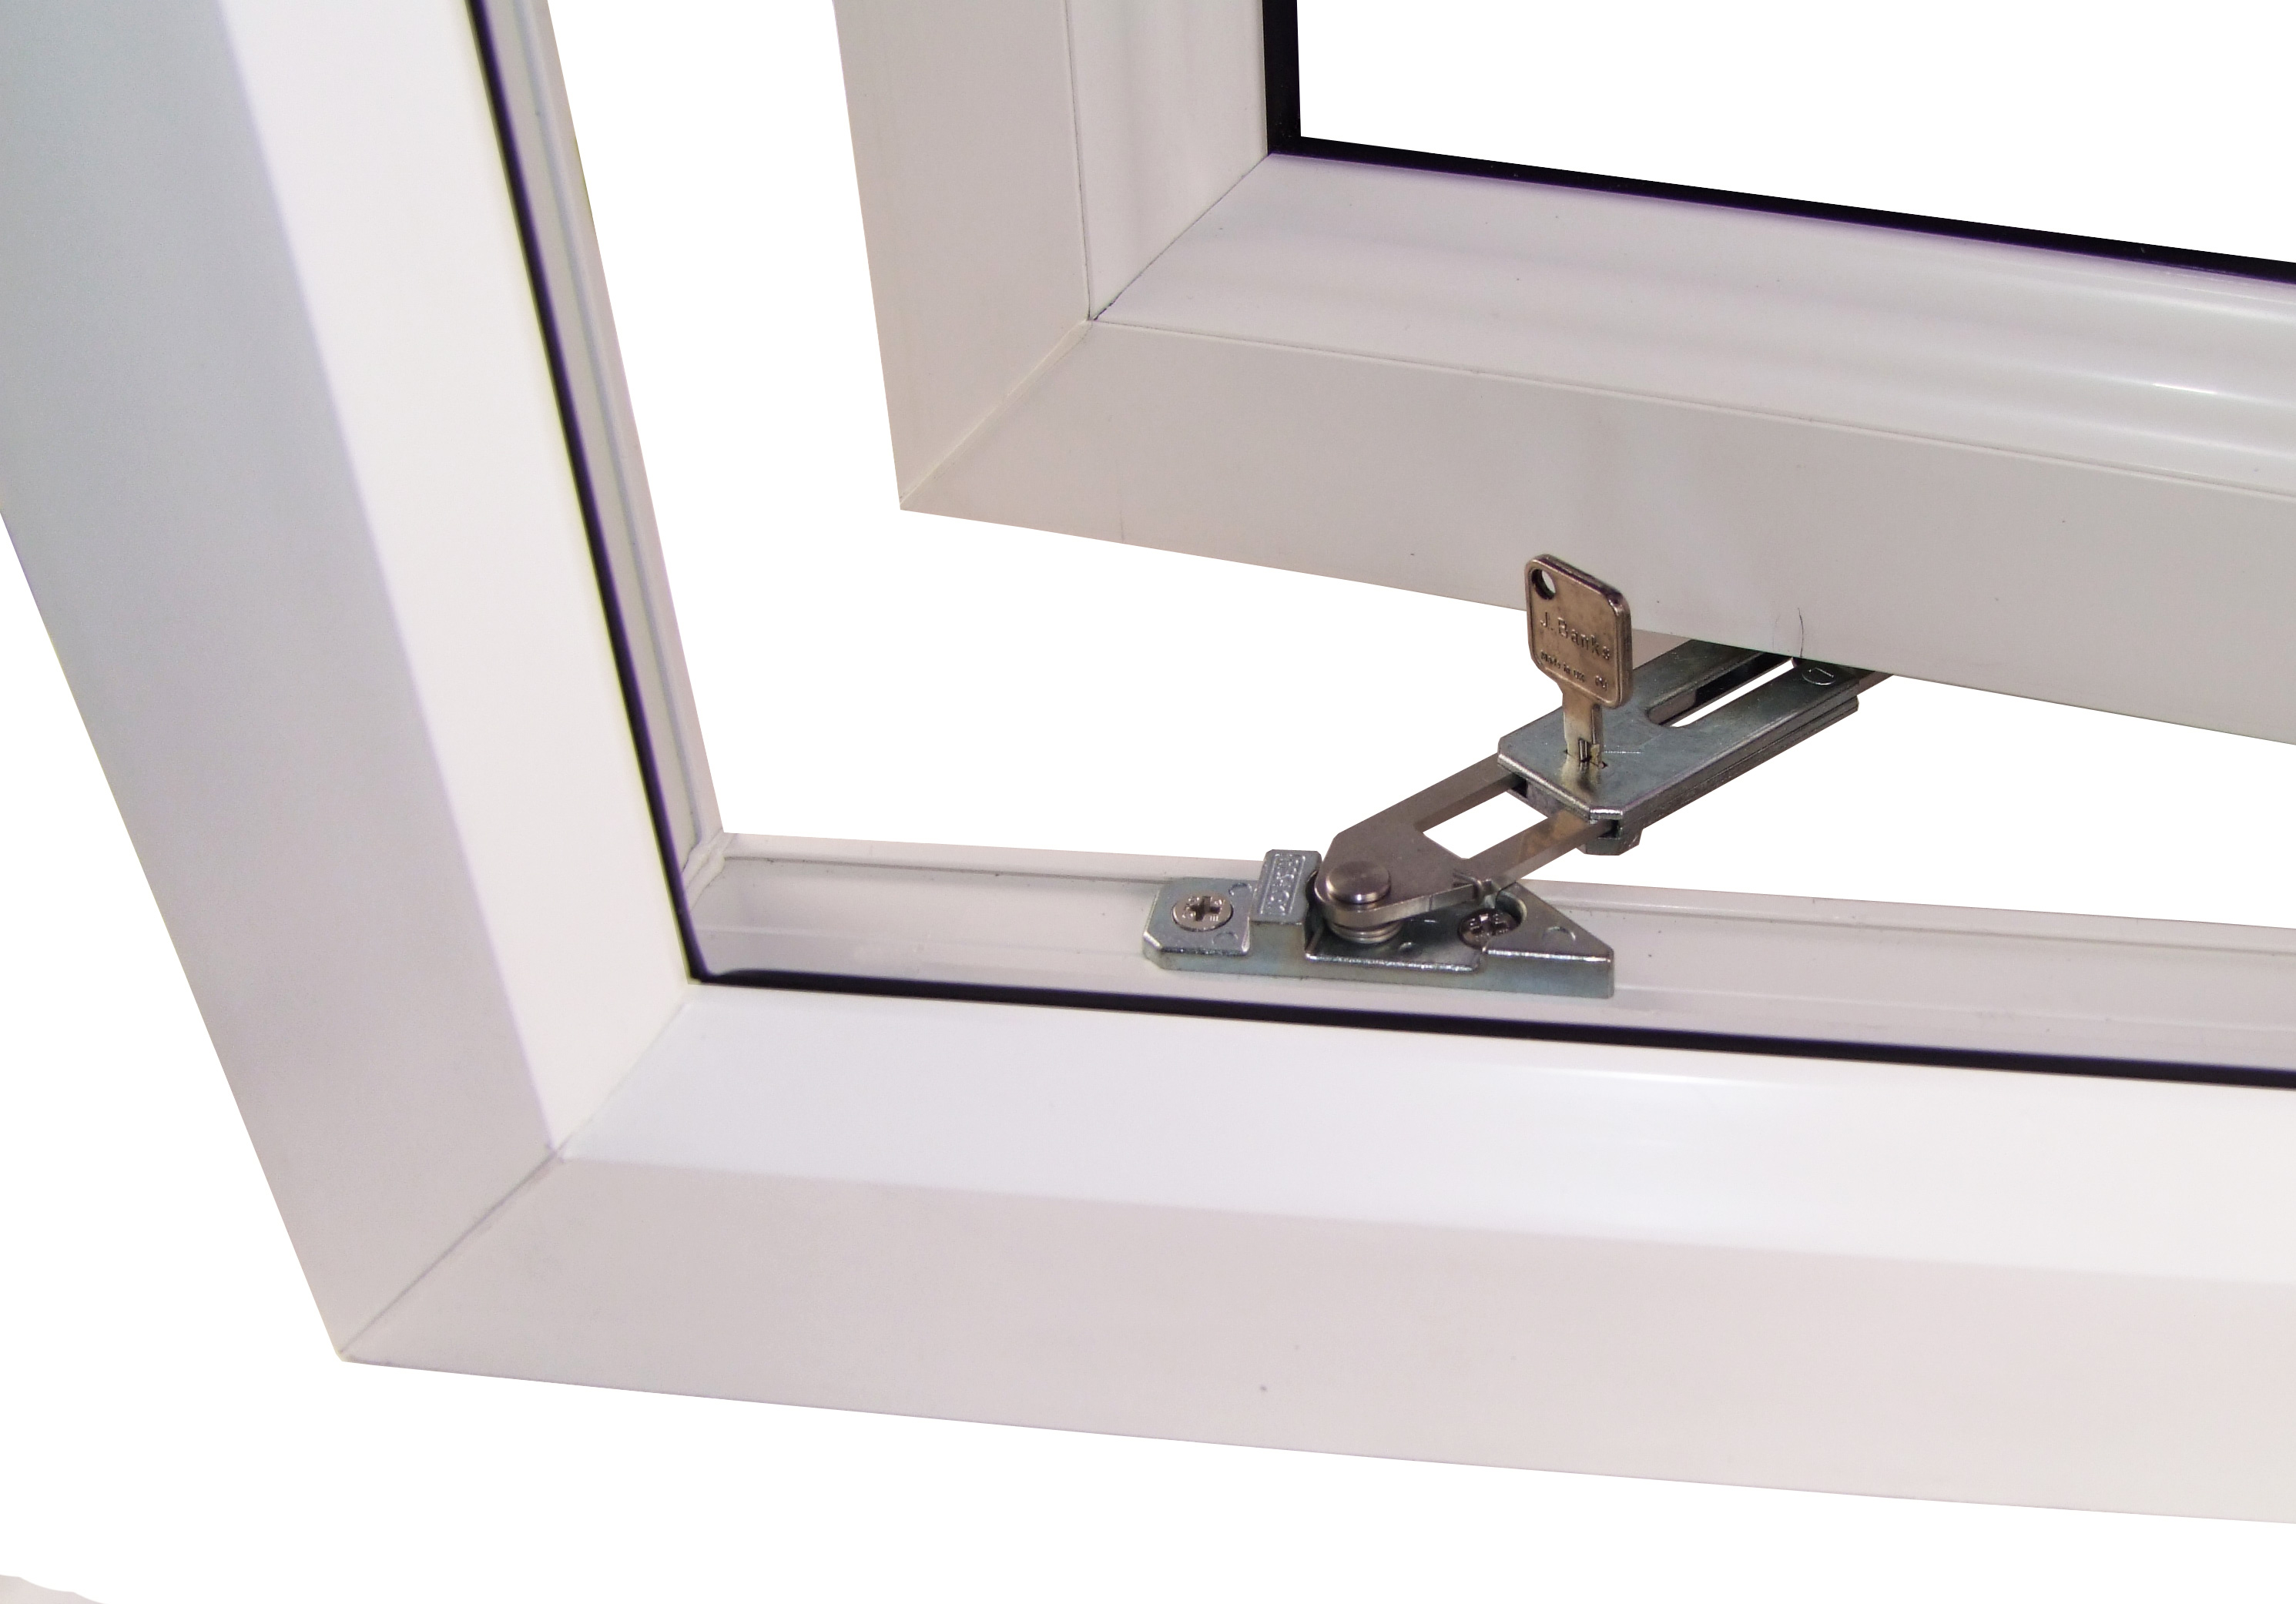 What is a window restrictor?